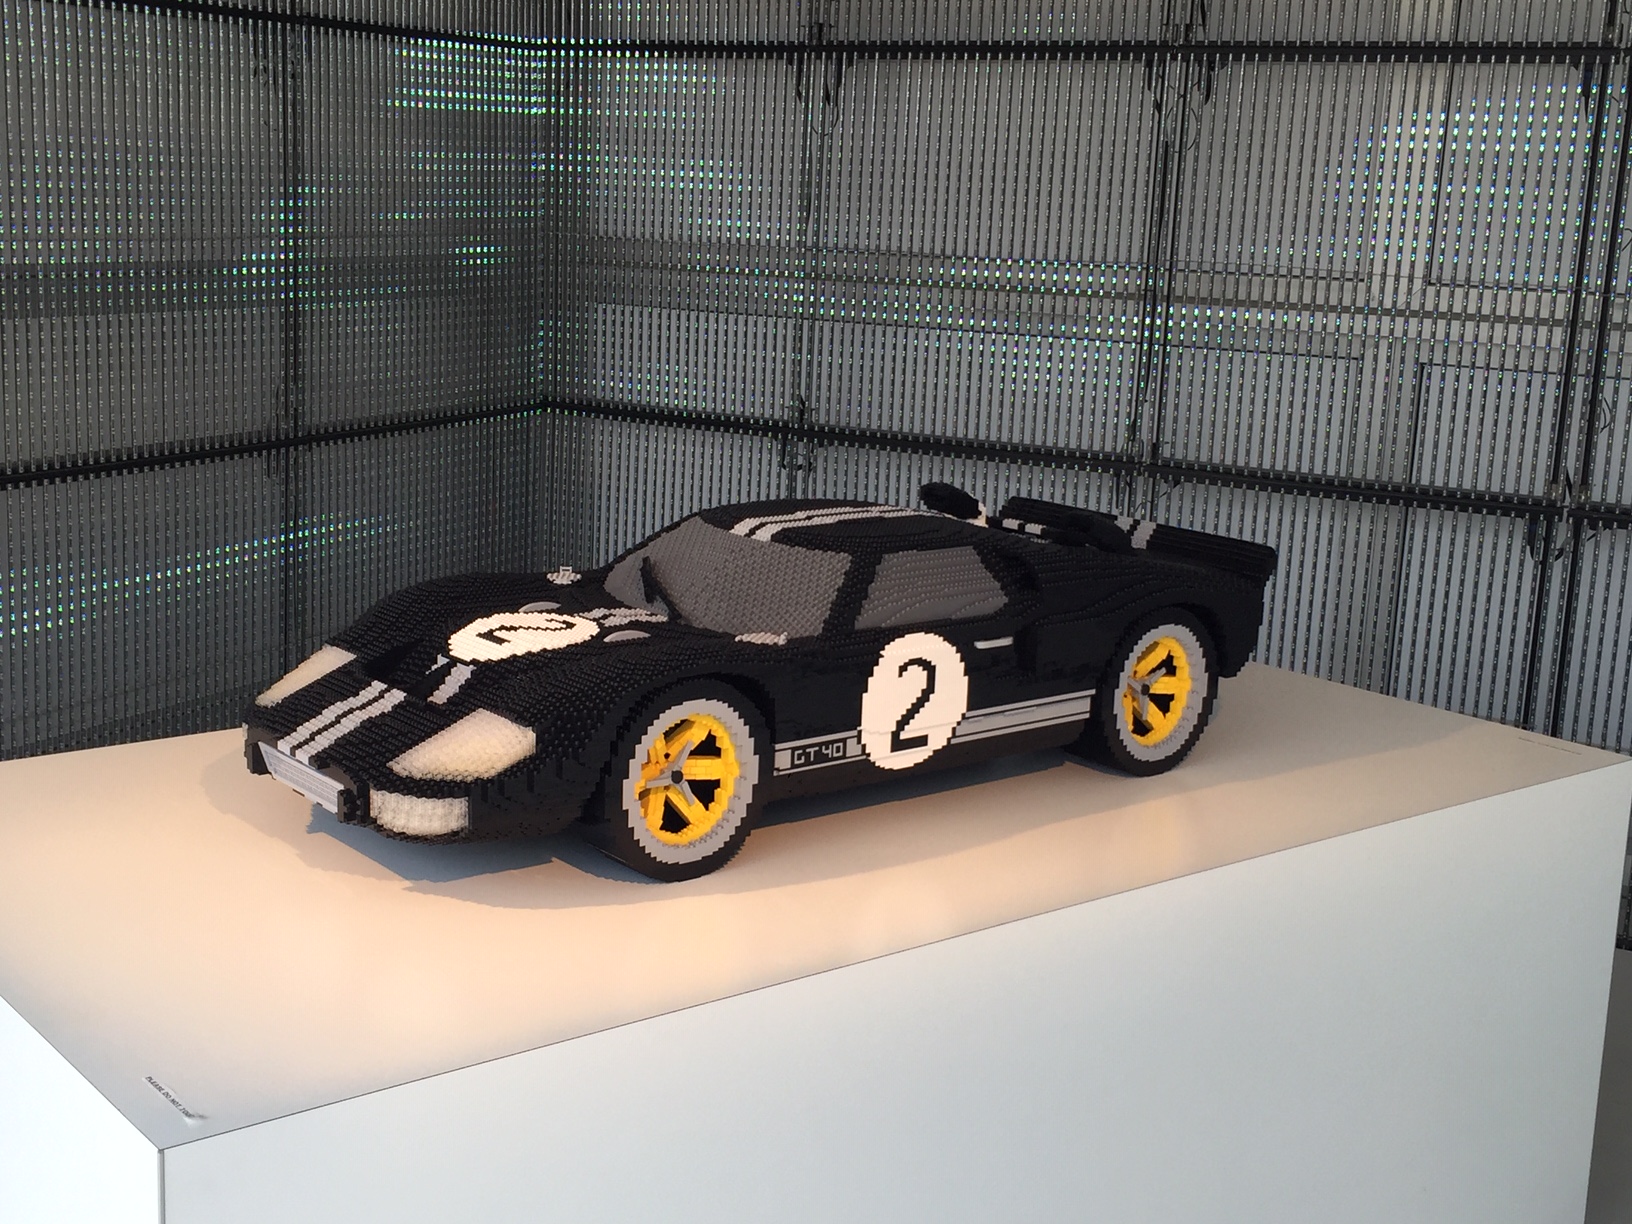 Cool! A giant Lego model of our car!!